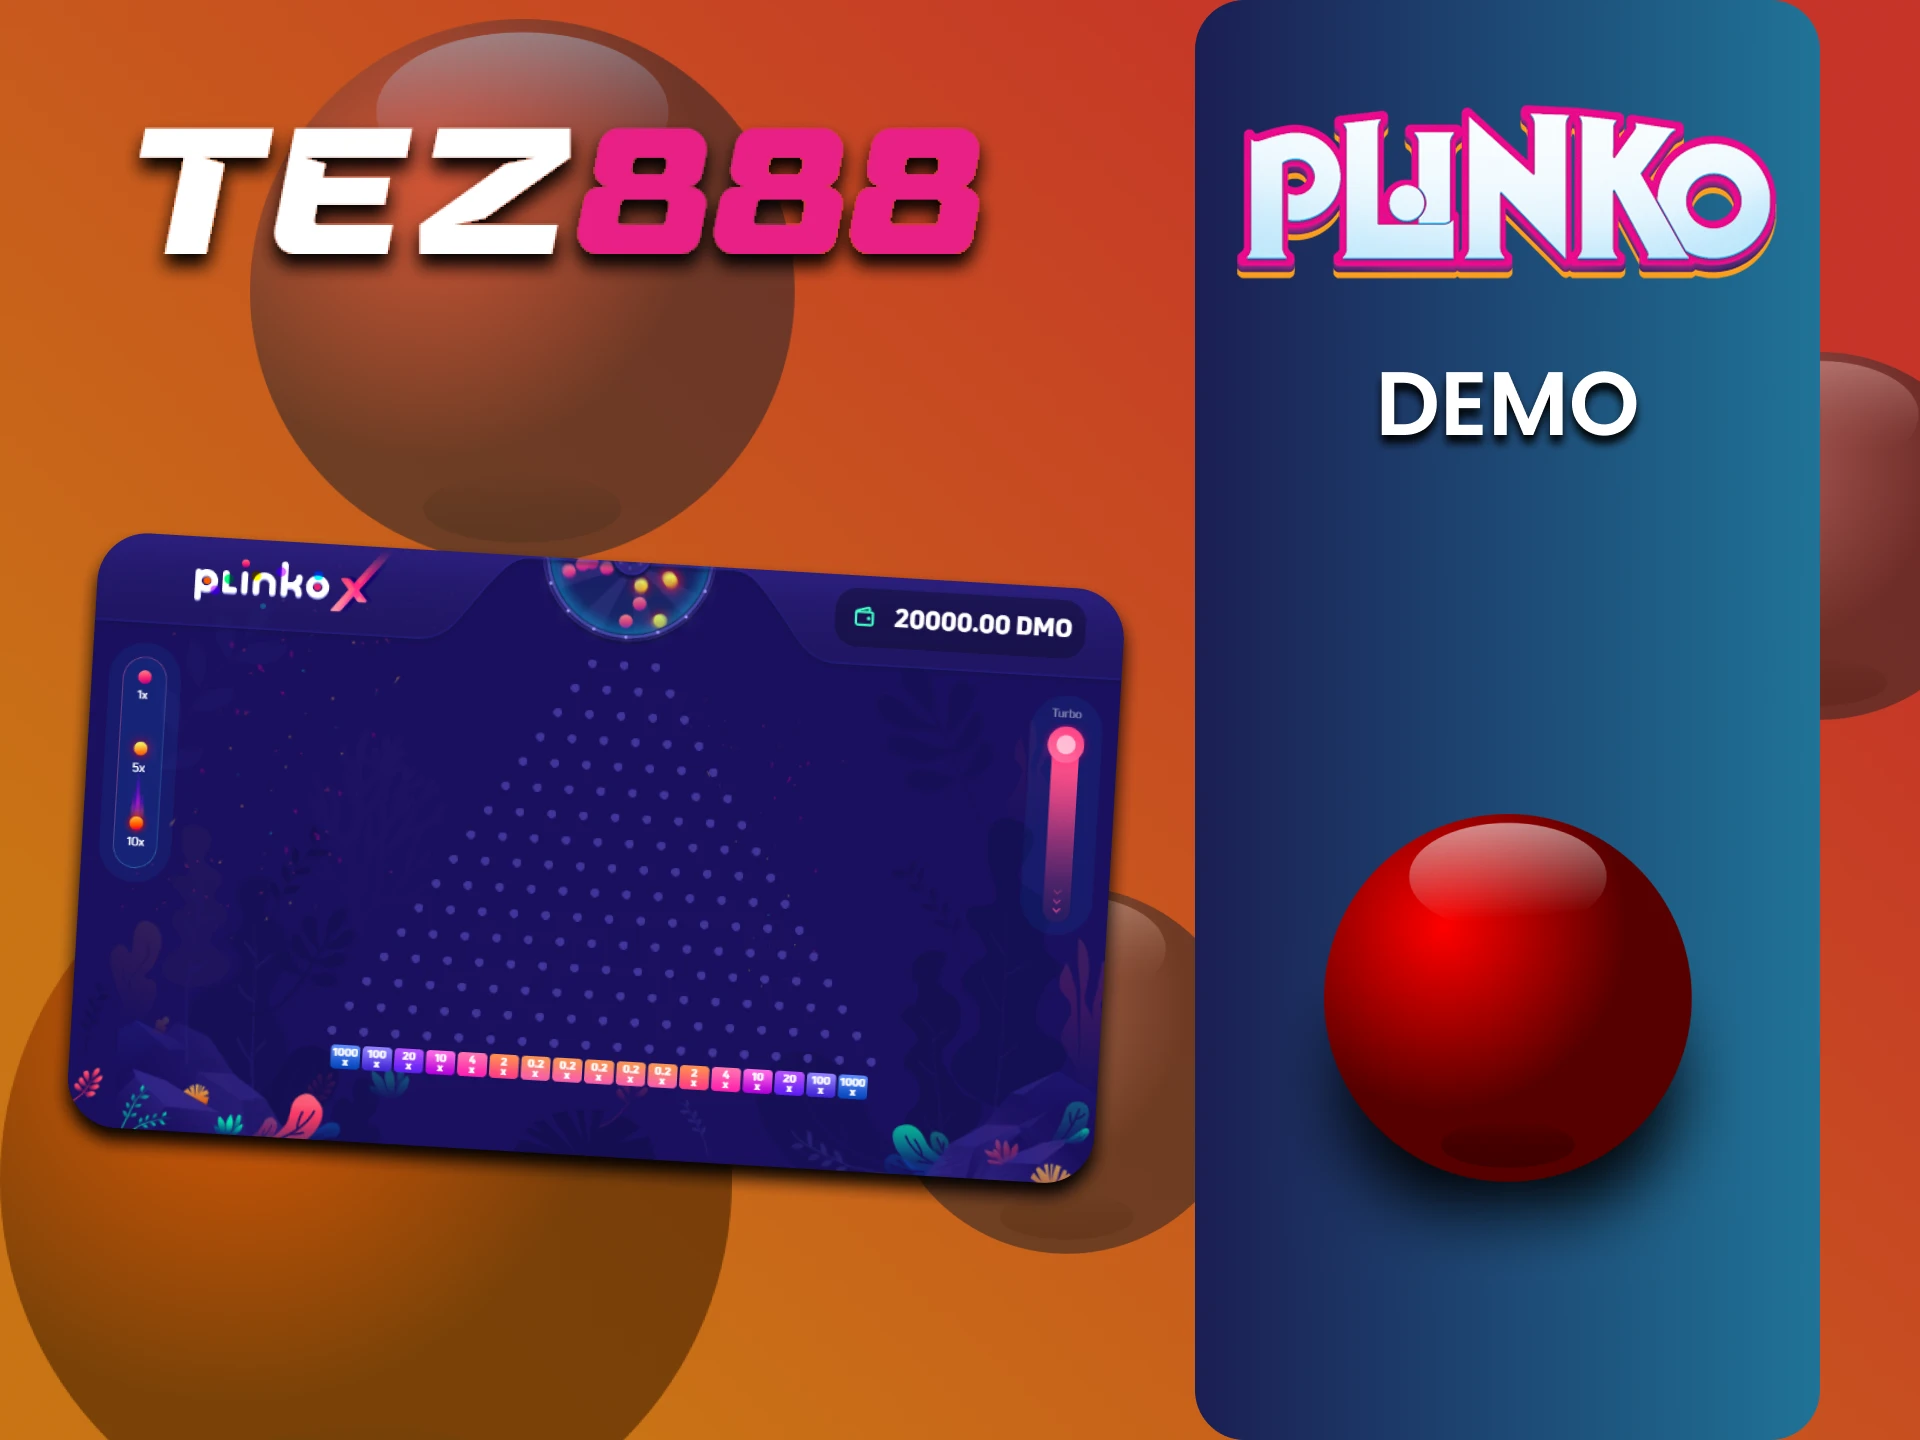 Practice with a demo version of the Plinko game on the Tez888 website.